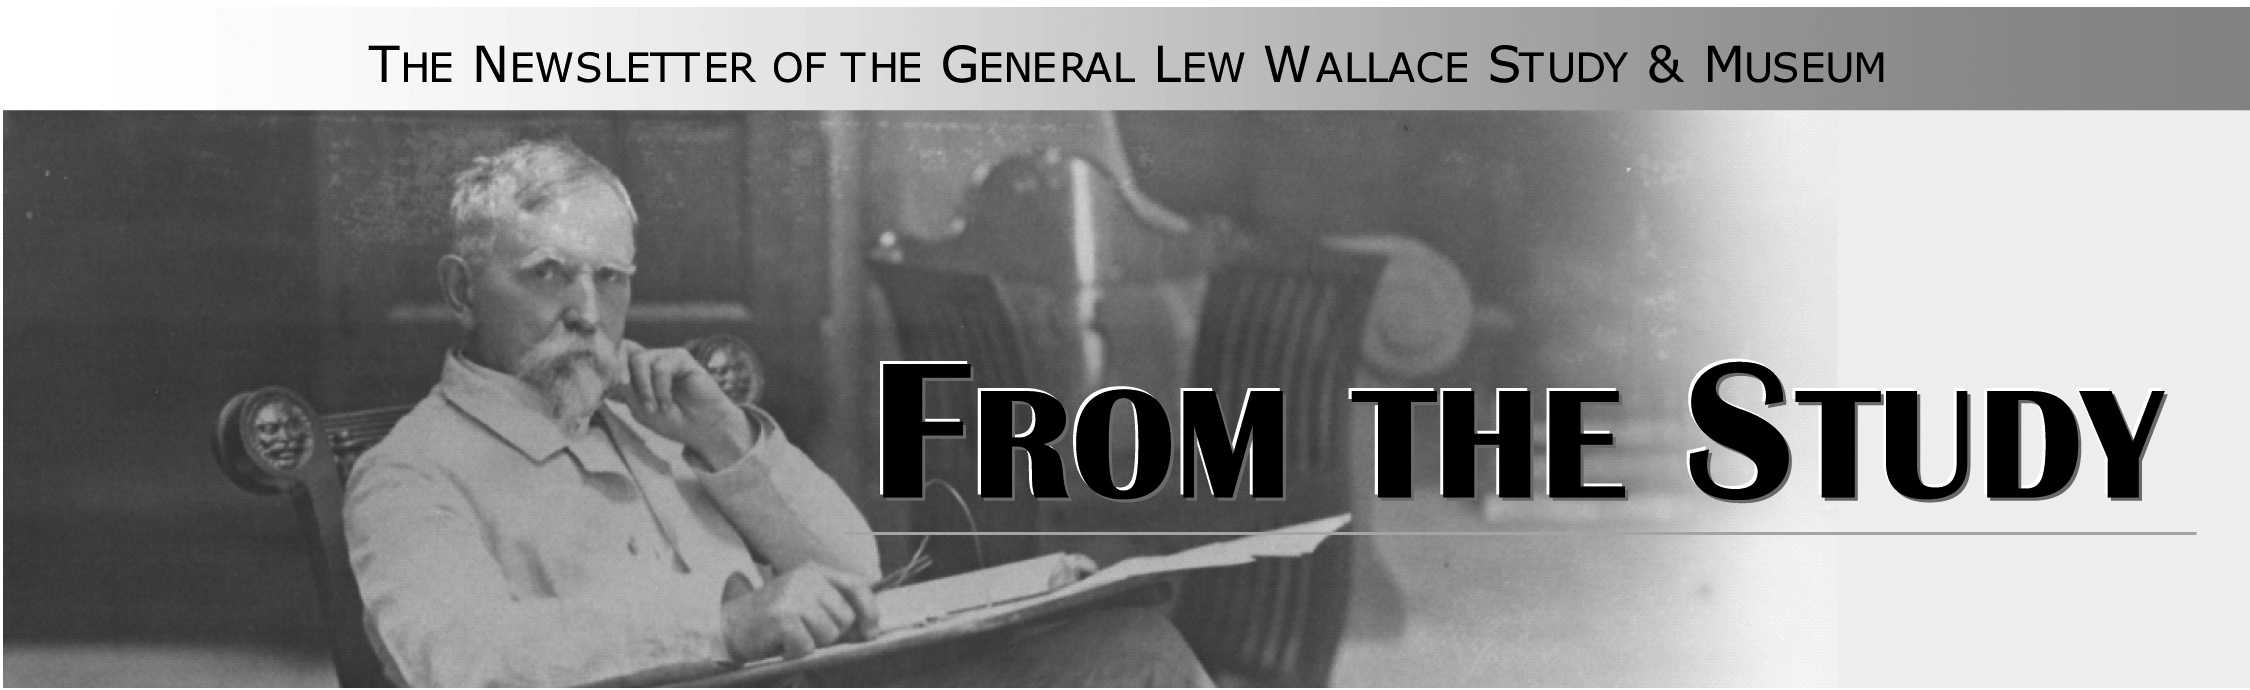 Newsletter masthead grayscale image featuring Lew Wallace and the newsletter title